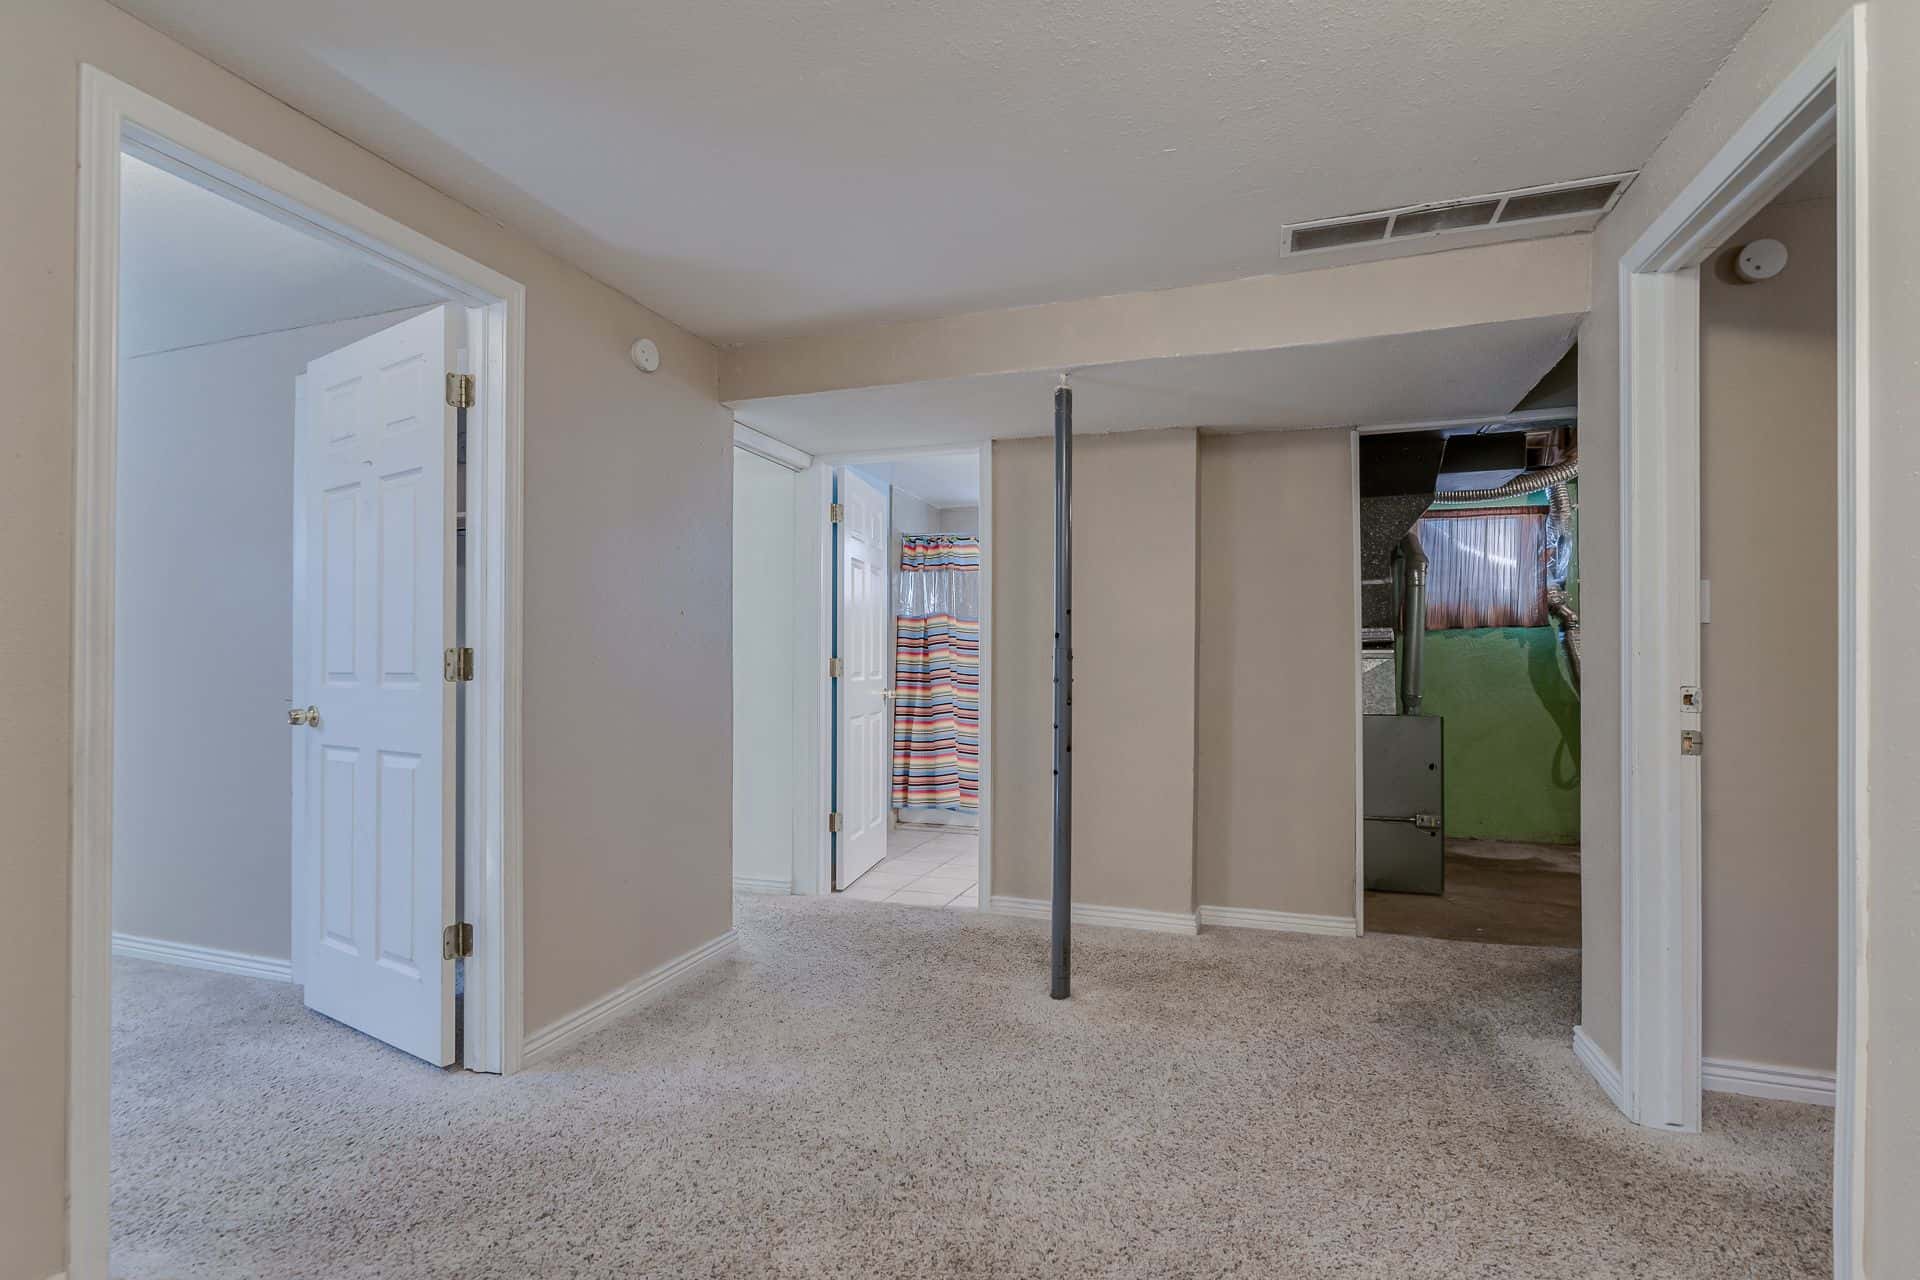 Basement Family Room into Basement Bedrooms and Mechanical/Laundry Room